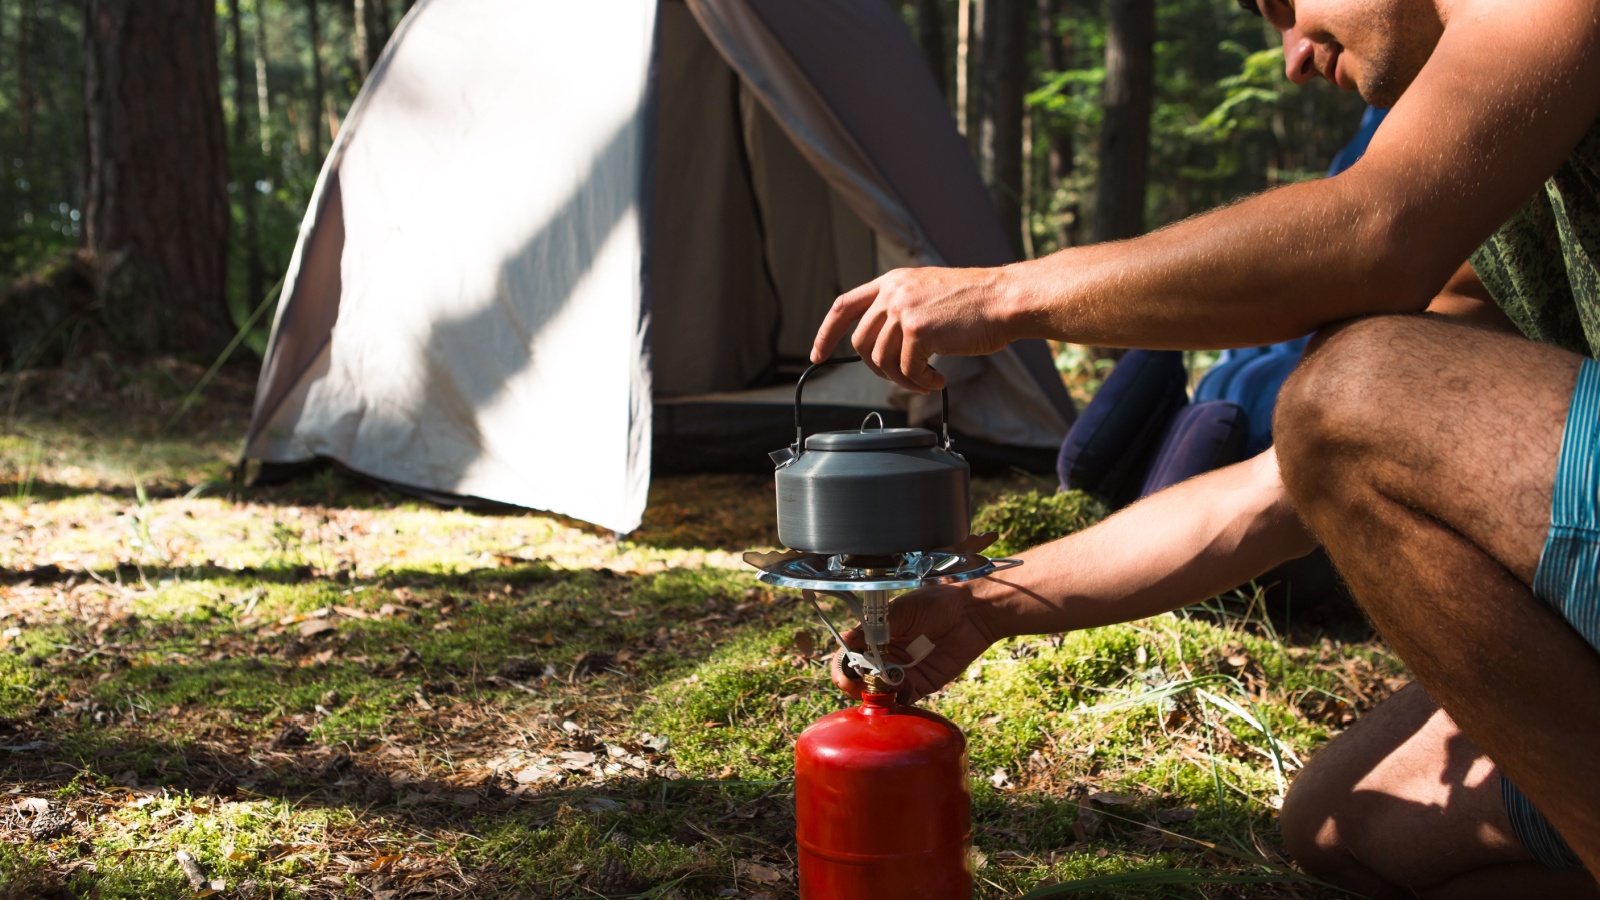 Cooking, heating kettle on a portable gas burner with a red gas cylinder. Camping, a man cooks breakfast outdoors. Summer outdoor activities